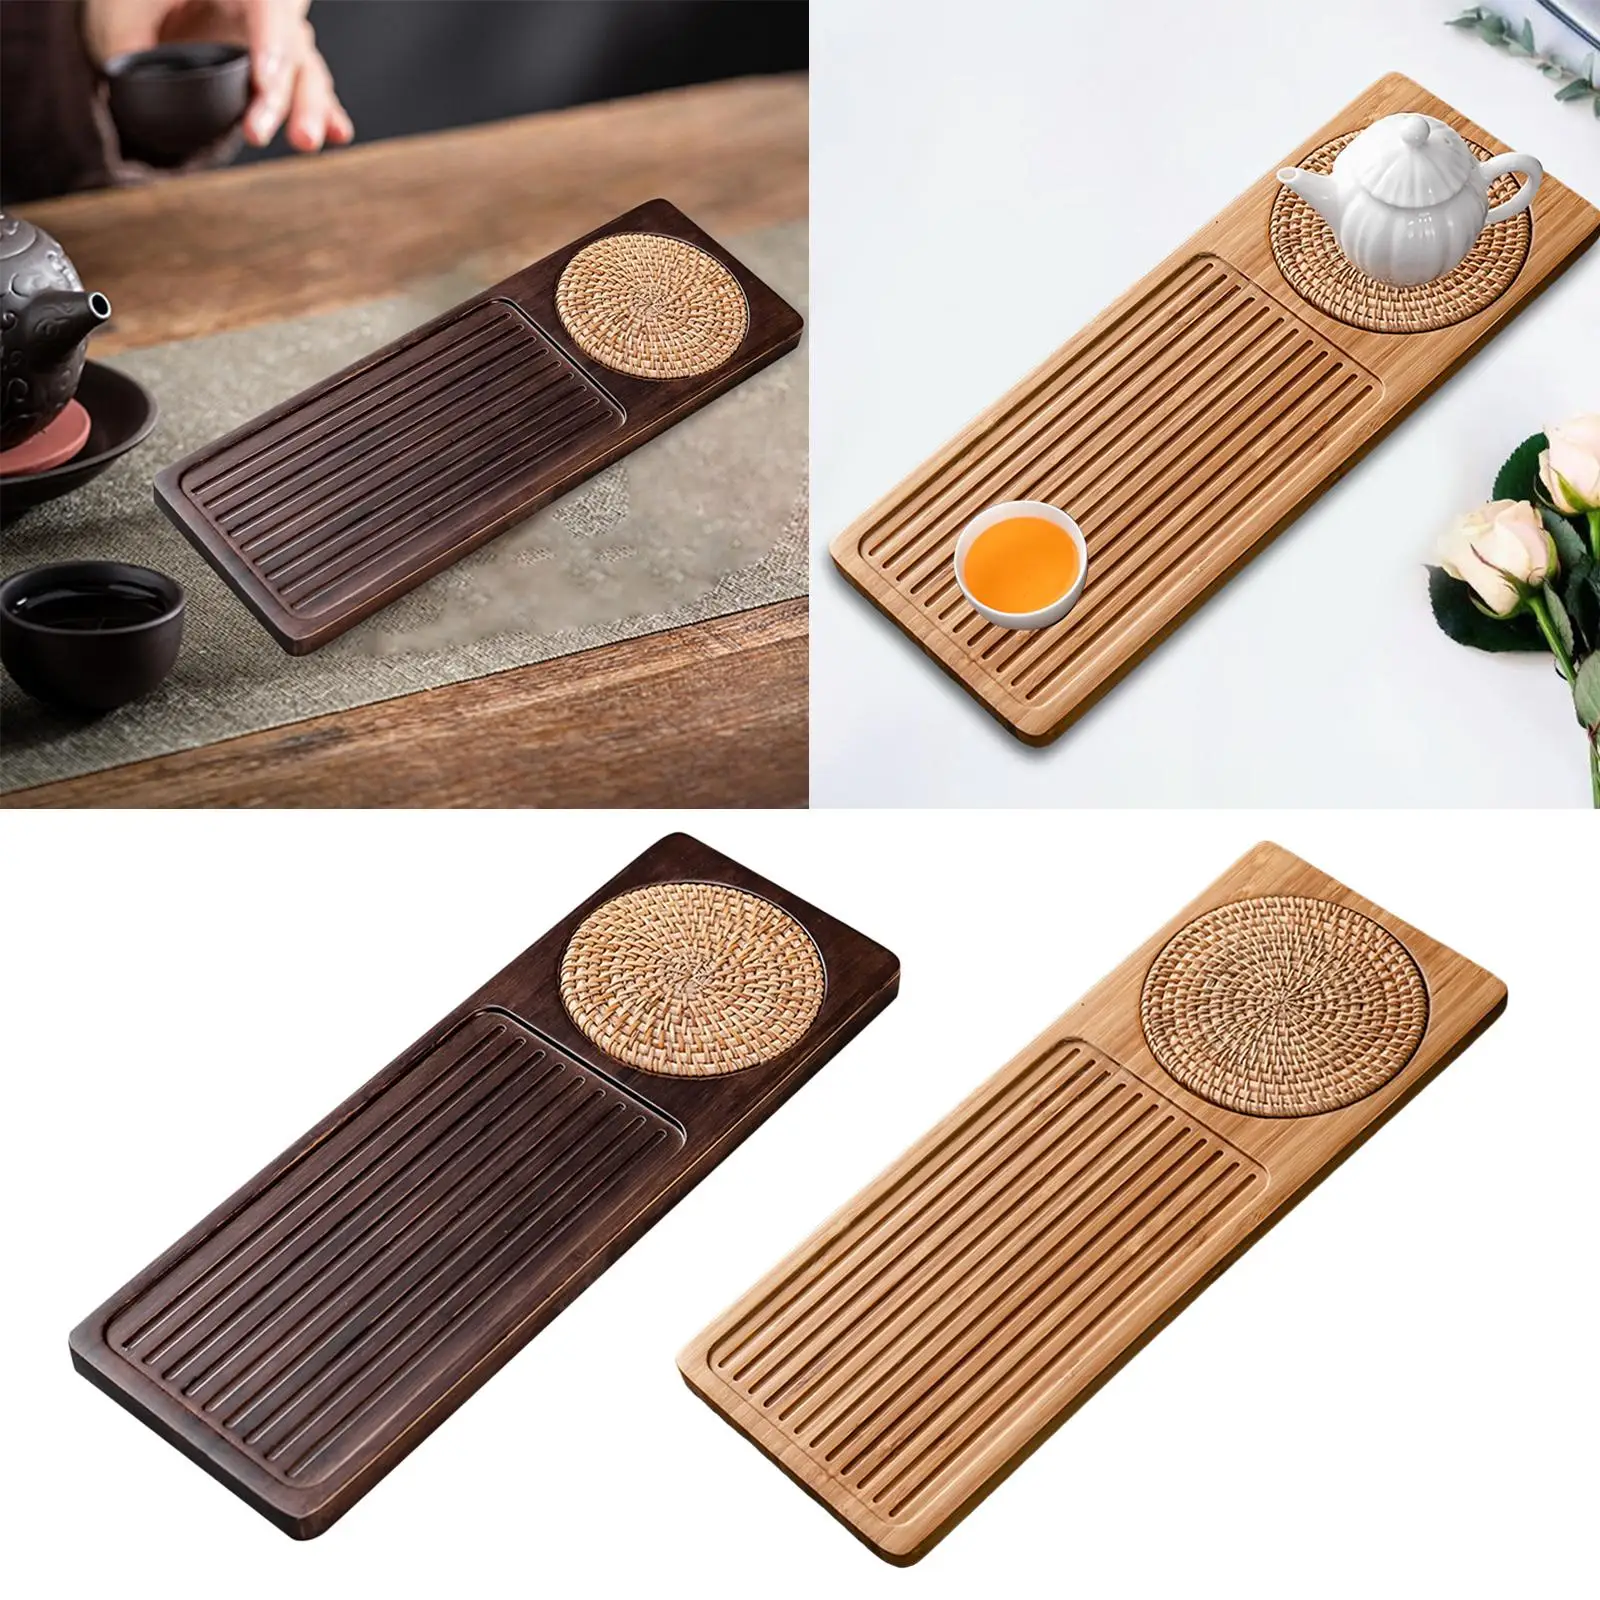 Rustic Bamboo Wood Tea Serving Tray Tea Serving Tray Household Tea Board for Travel Tea Set Home Decoration Accessories